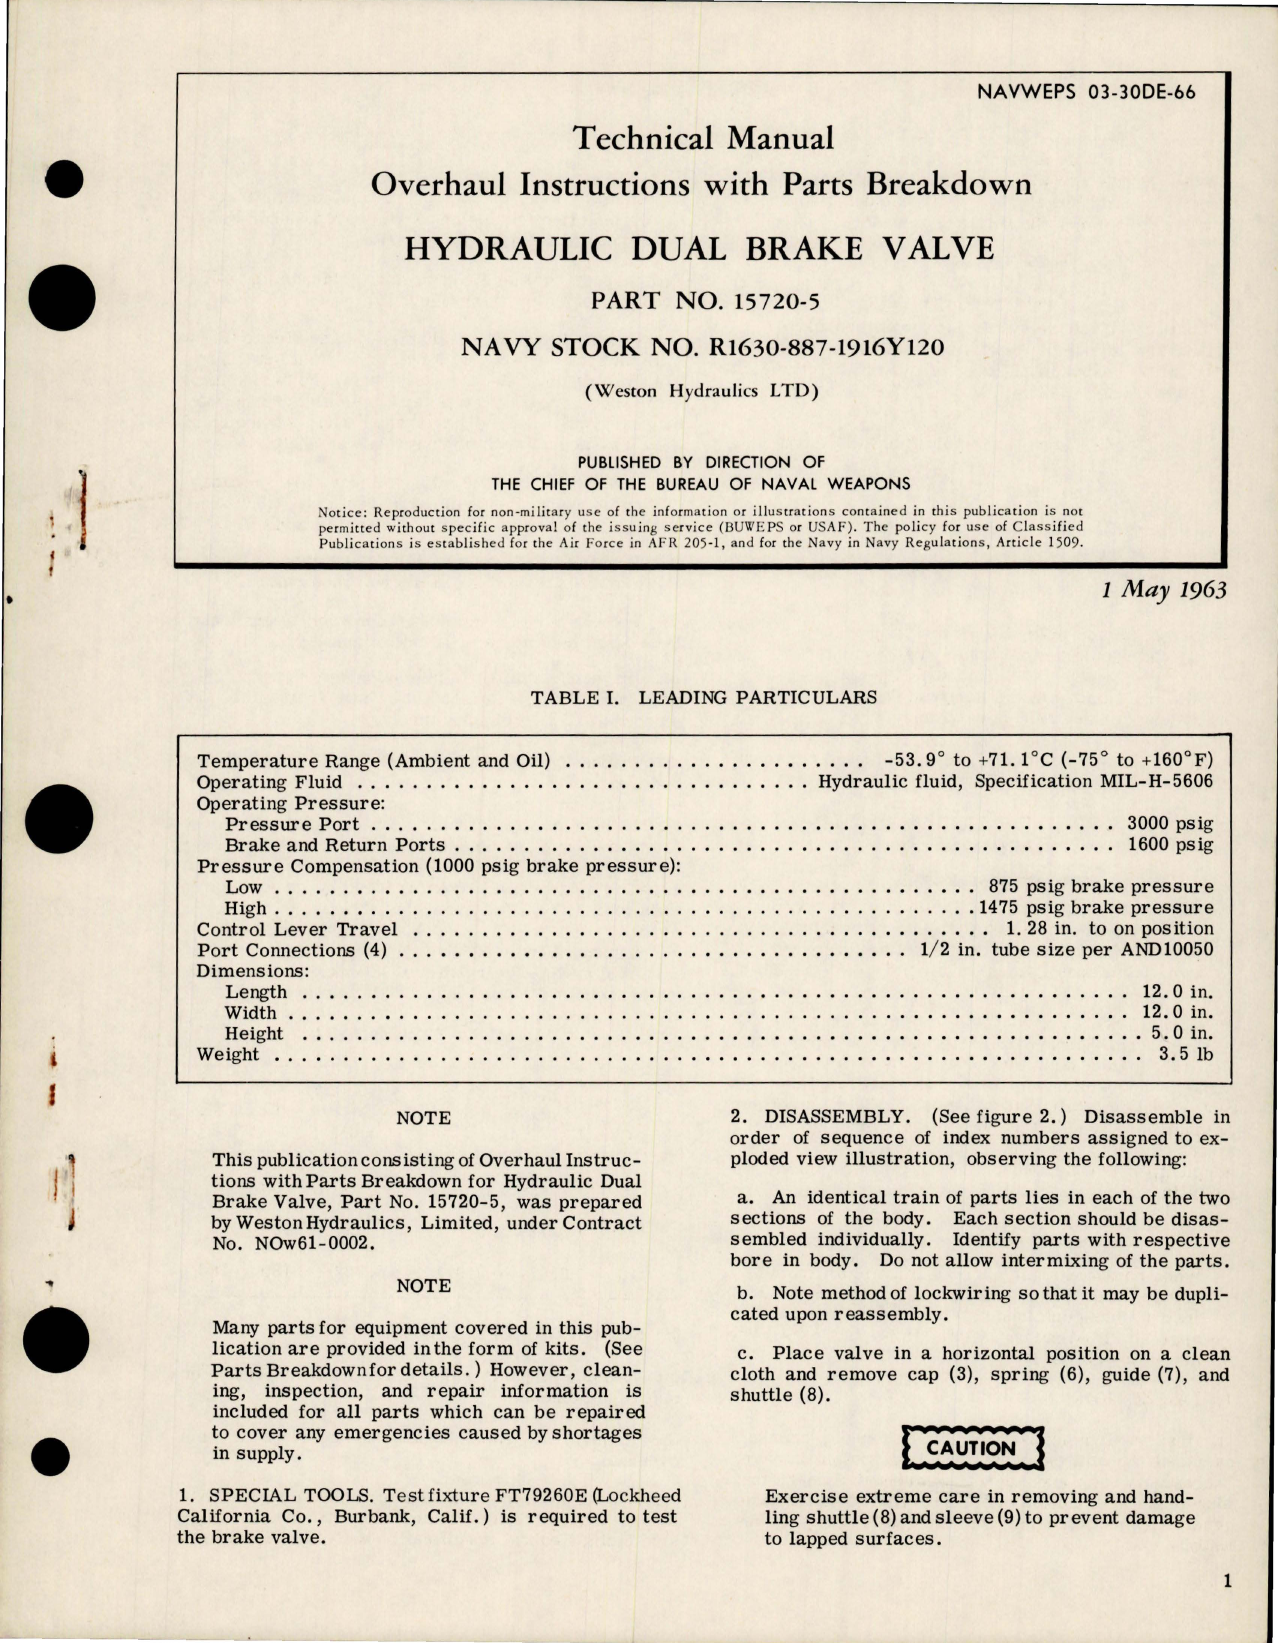 Sample page 1 from AirCorps Library document: Overhaul Instructions w Parts Breakdown for Hydraulic Dual Brake Valve - Part 15720-5